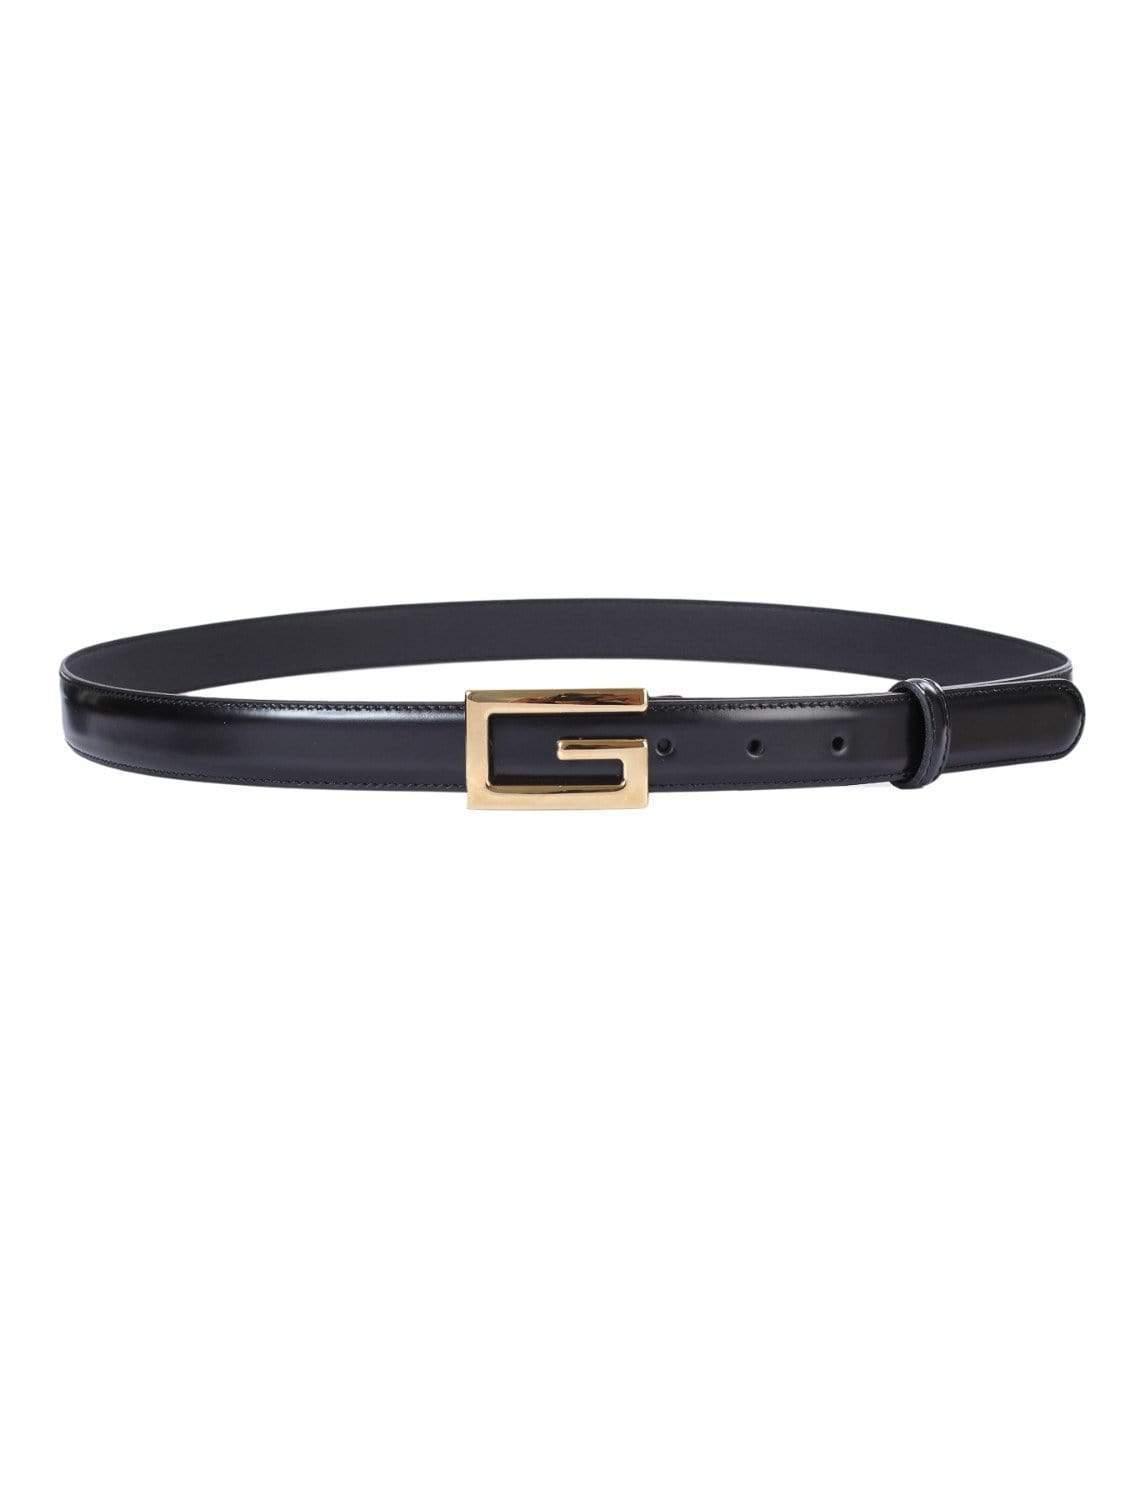 Gucci Thin Belt In Black Leather With Rectangular Buckle G for Men - Lyst